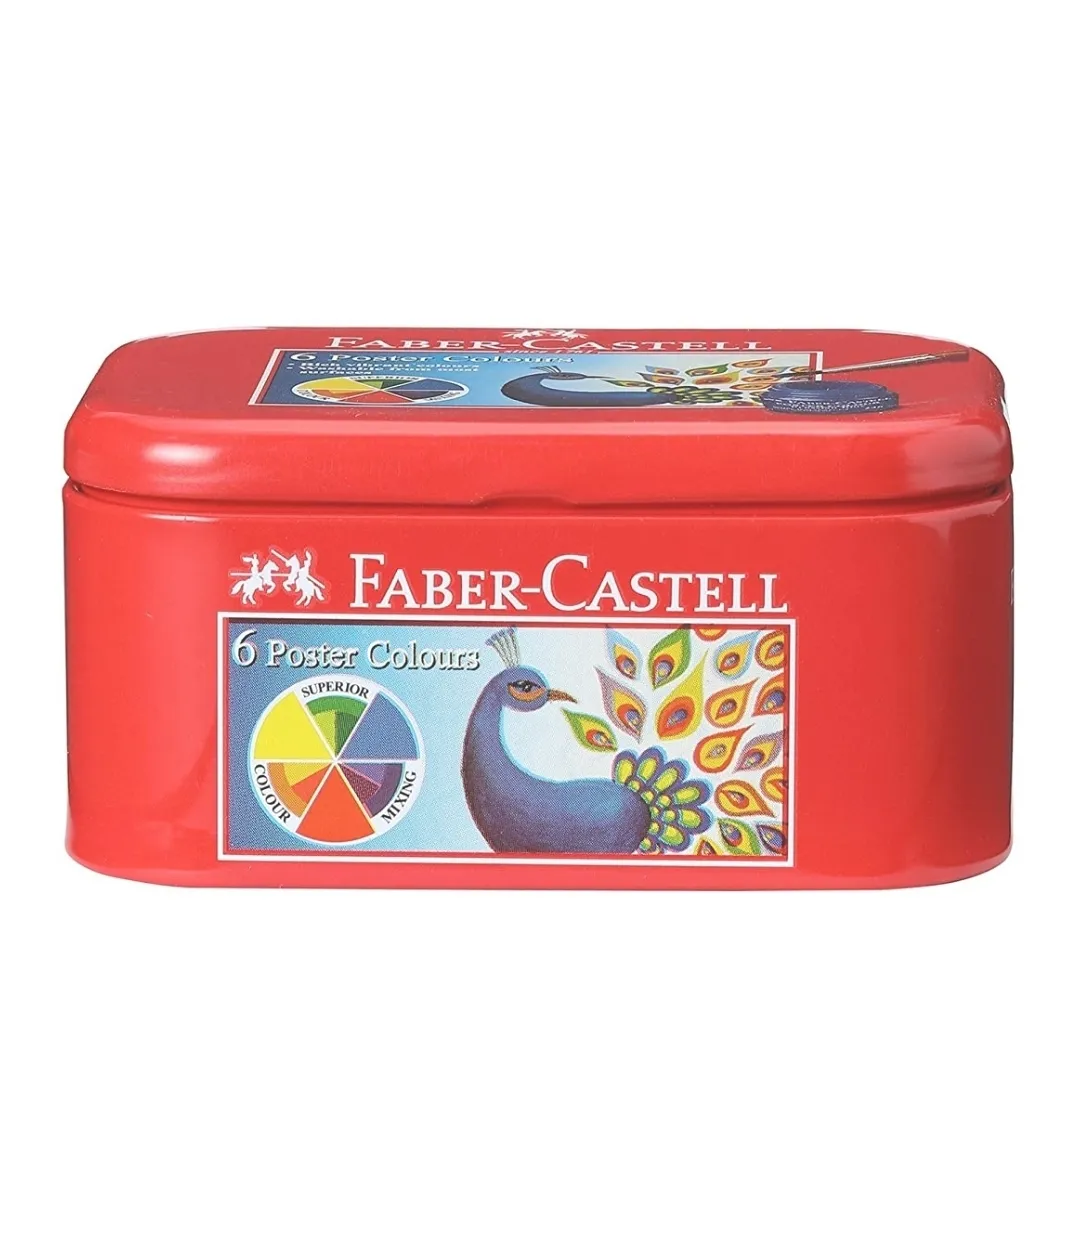 Faber Castell Poster Colours Set of 6 Shades